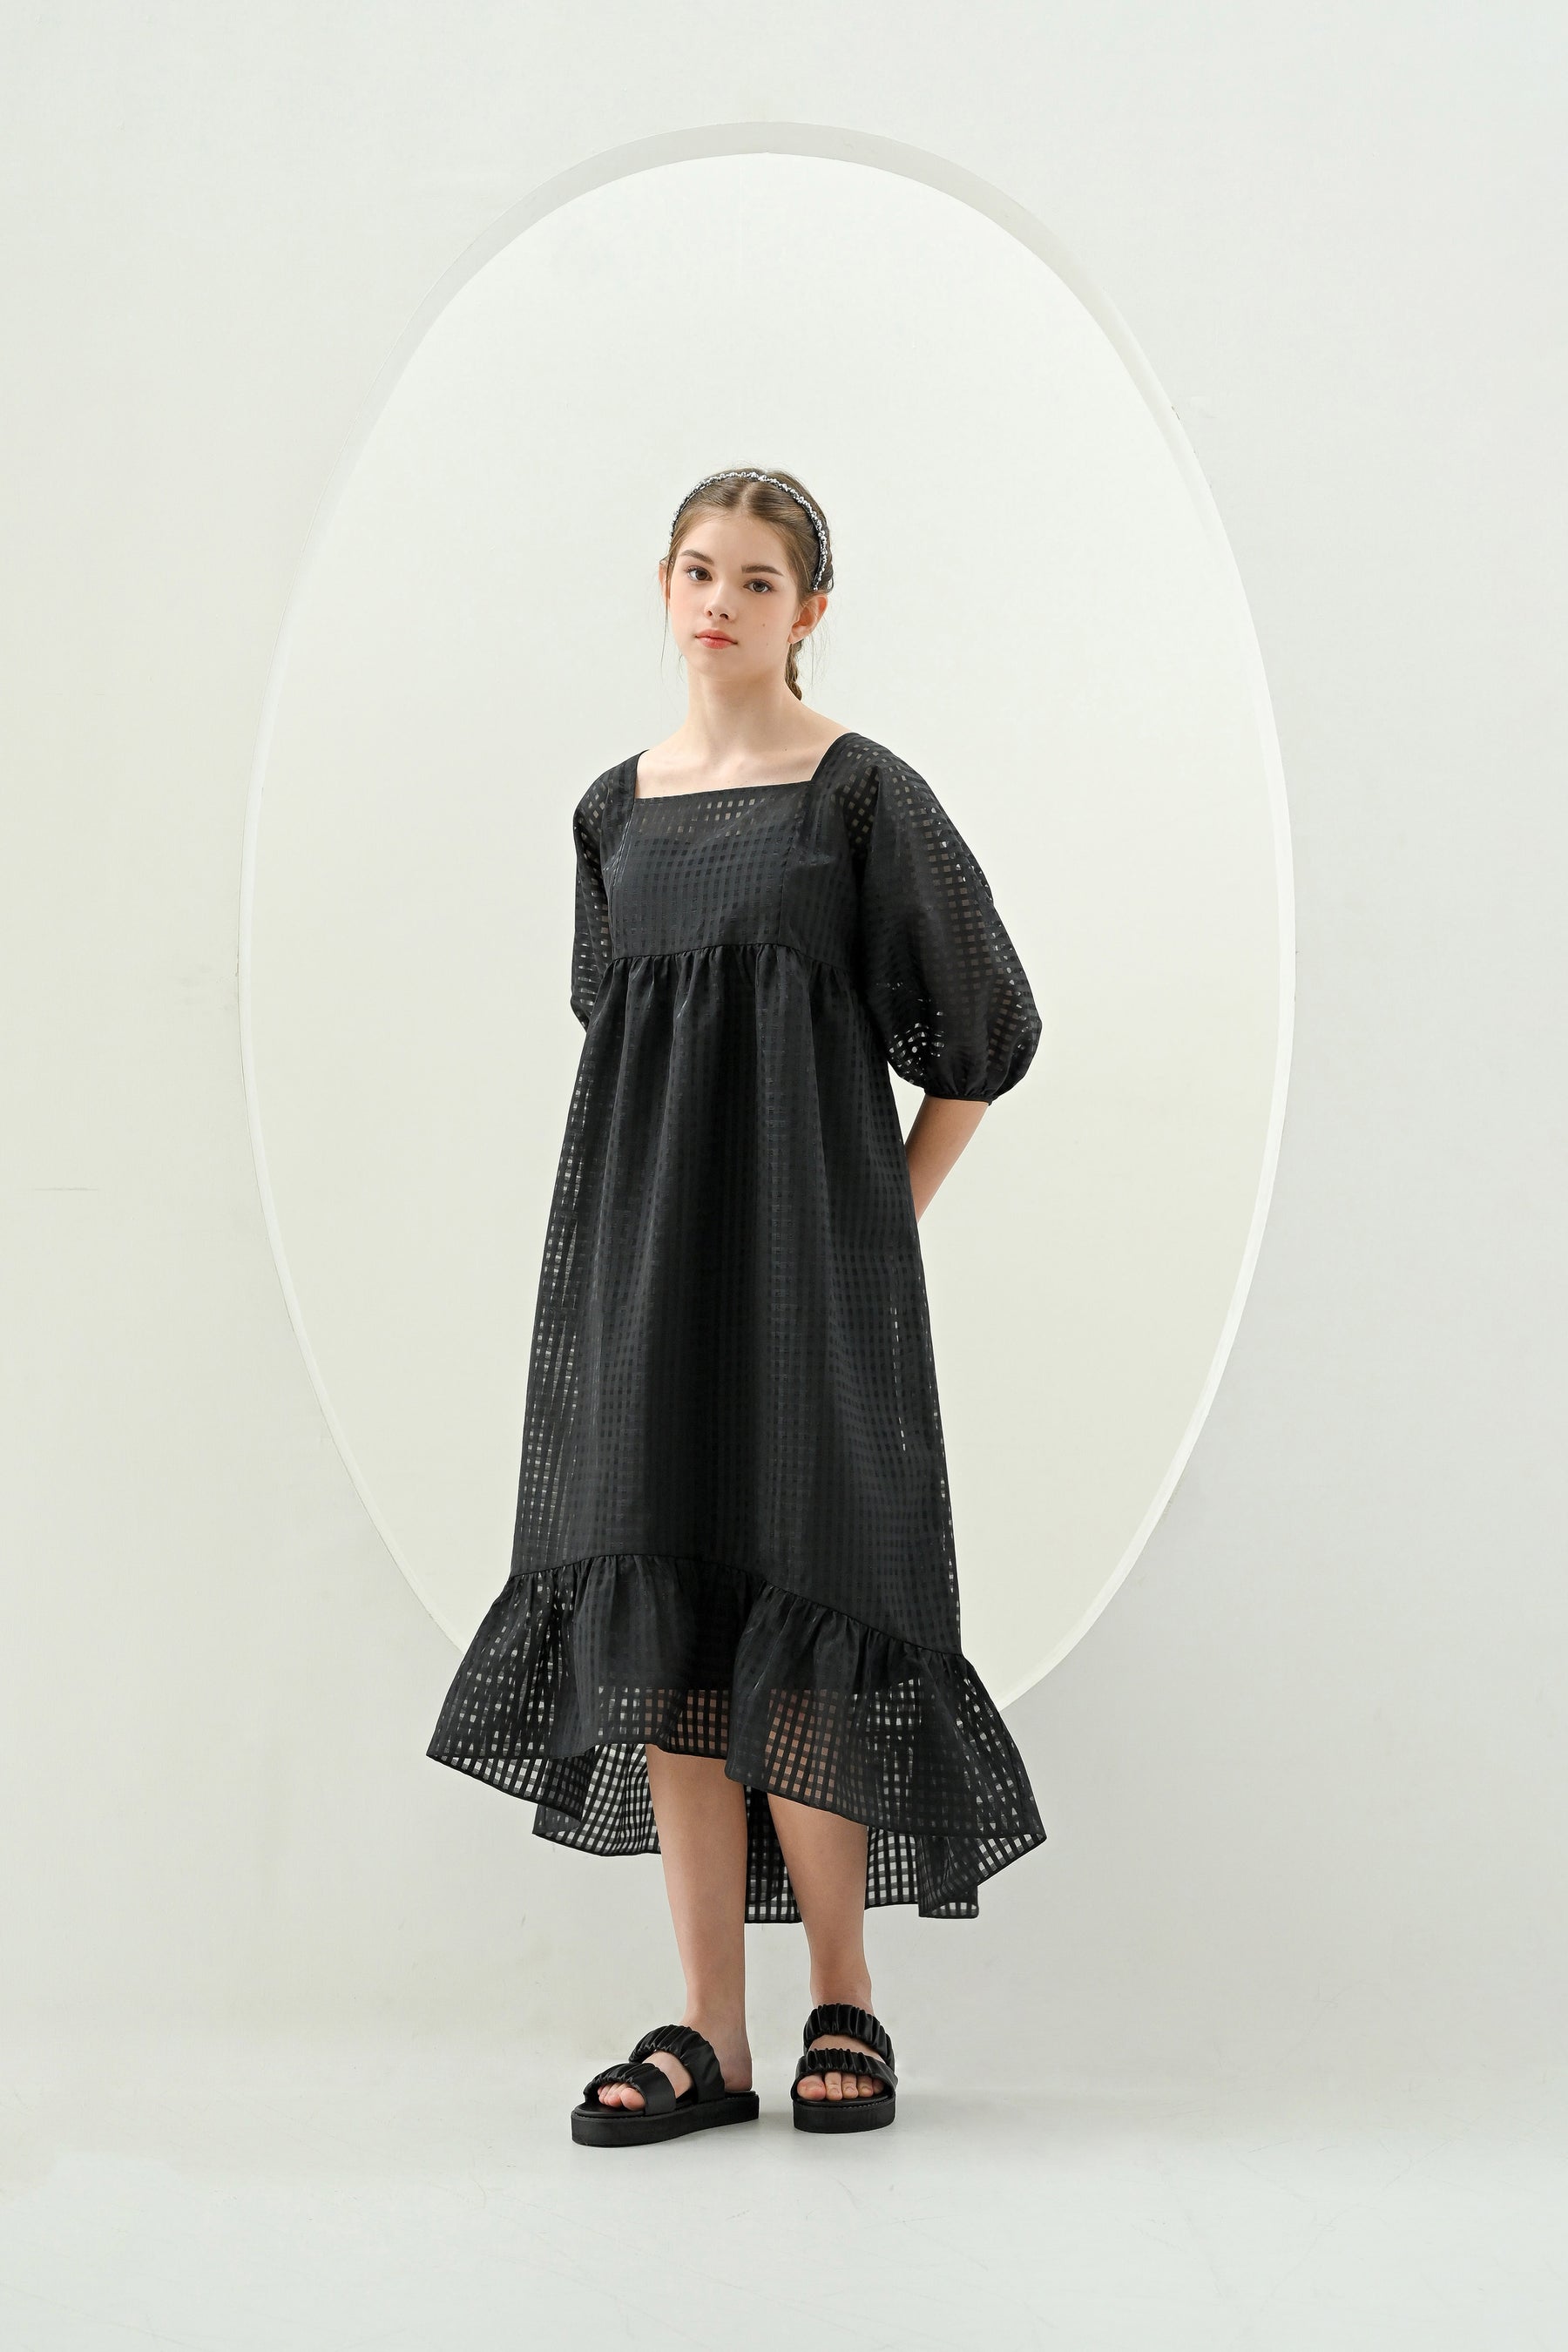 Dresses | ÁINE Ready to Wear | Shop Mindfully-Made Pieces